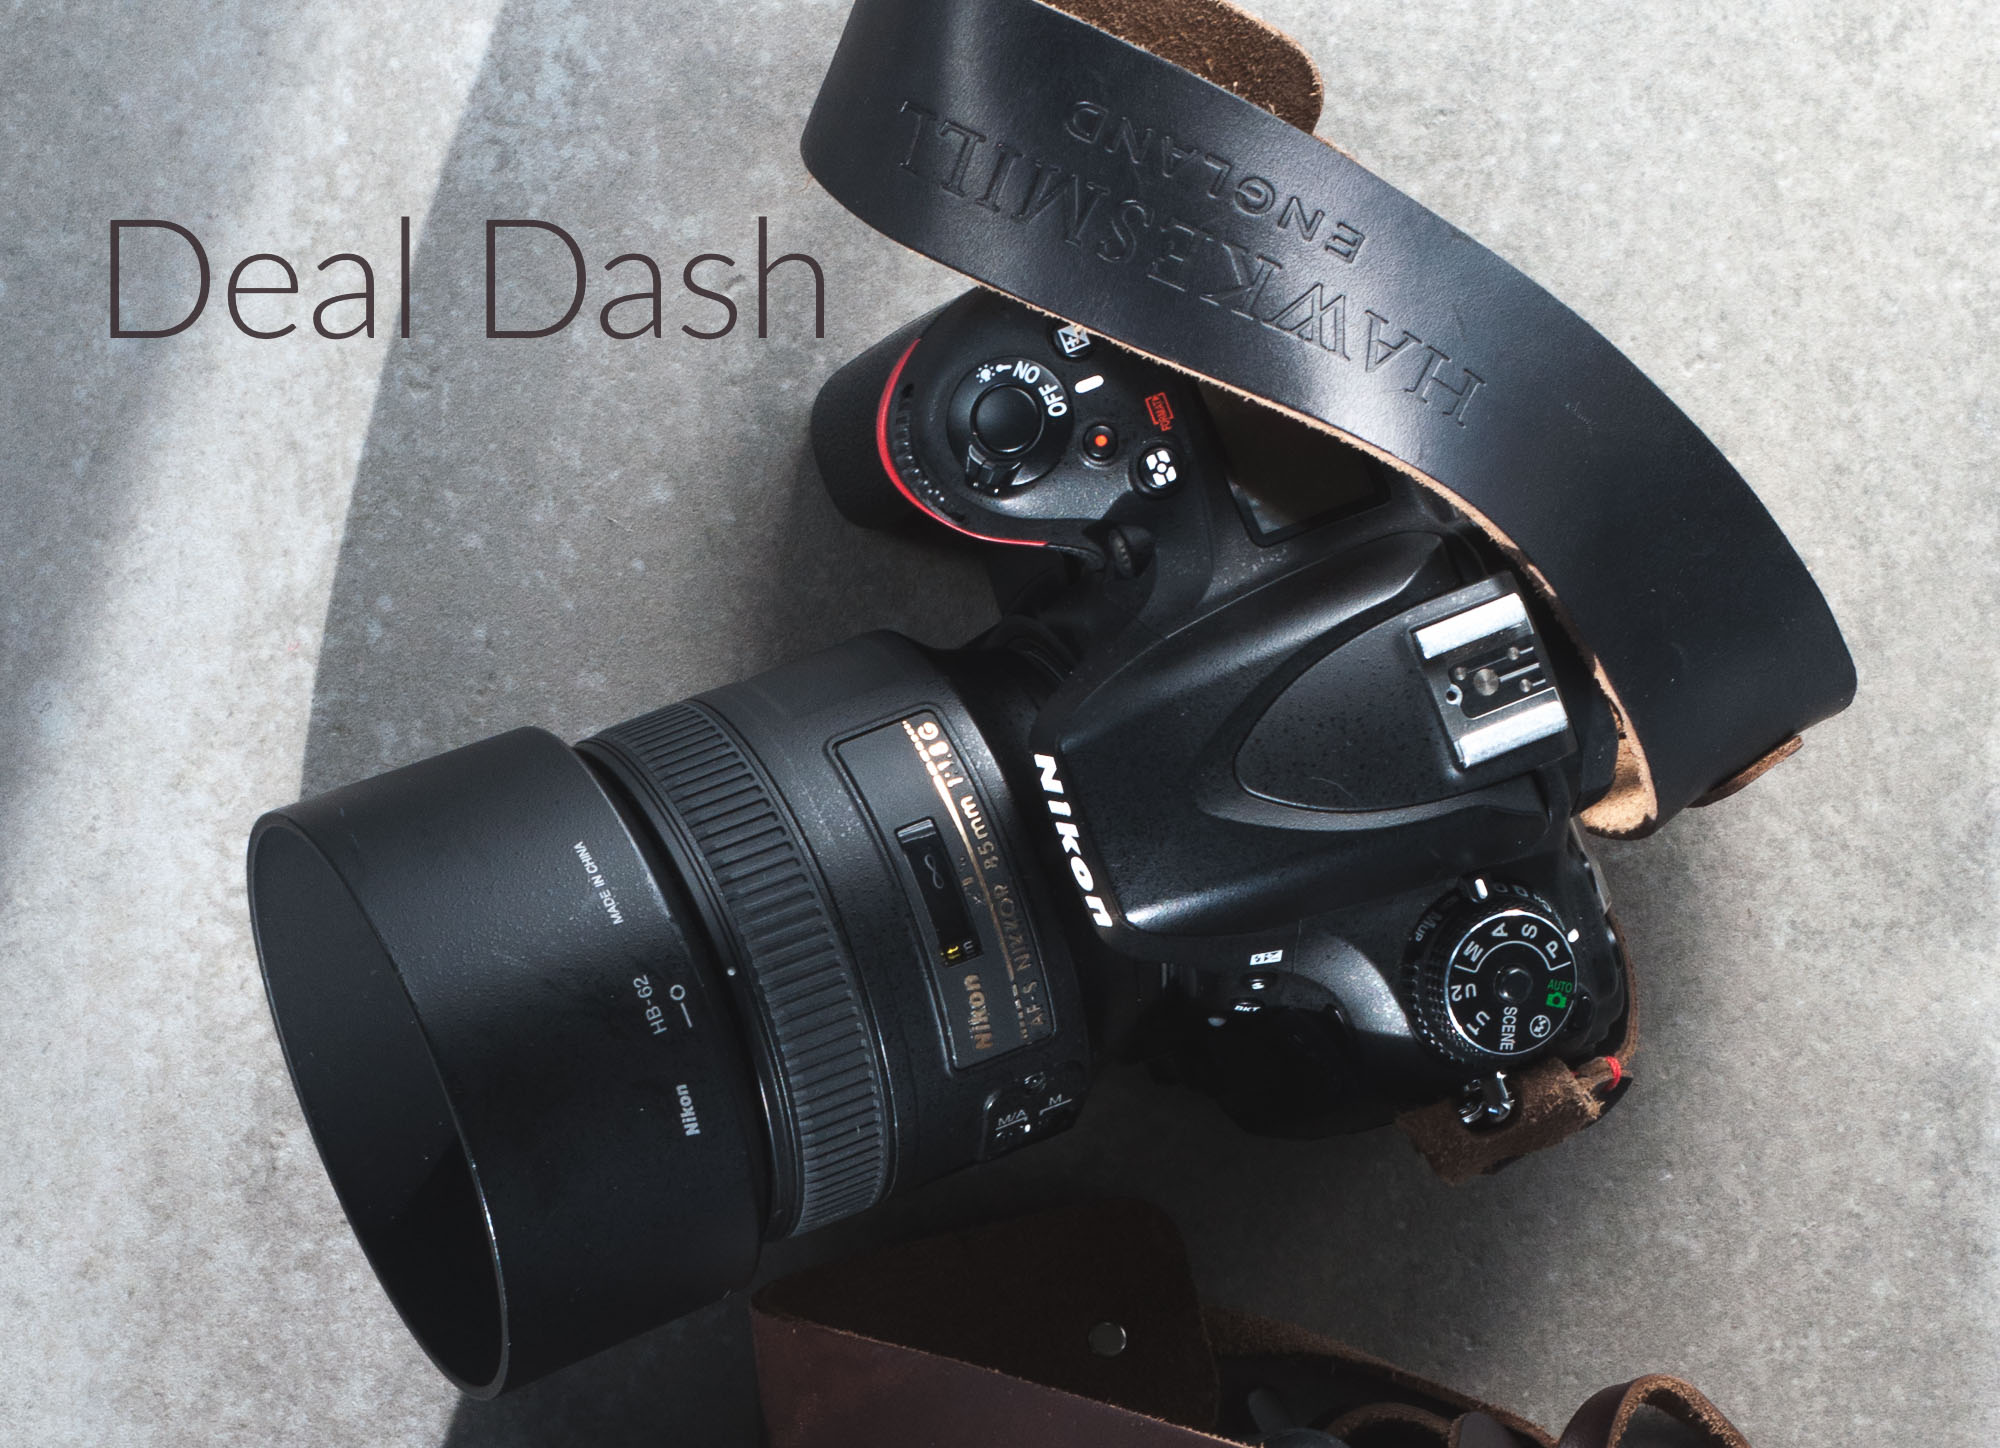 Up To 50% Off CreativeLive,  & $900 Off Nikon & Canon Cameras and Lenses (Deal Dash)